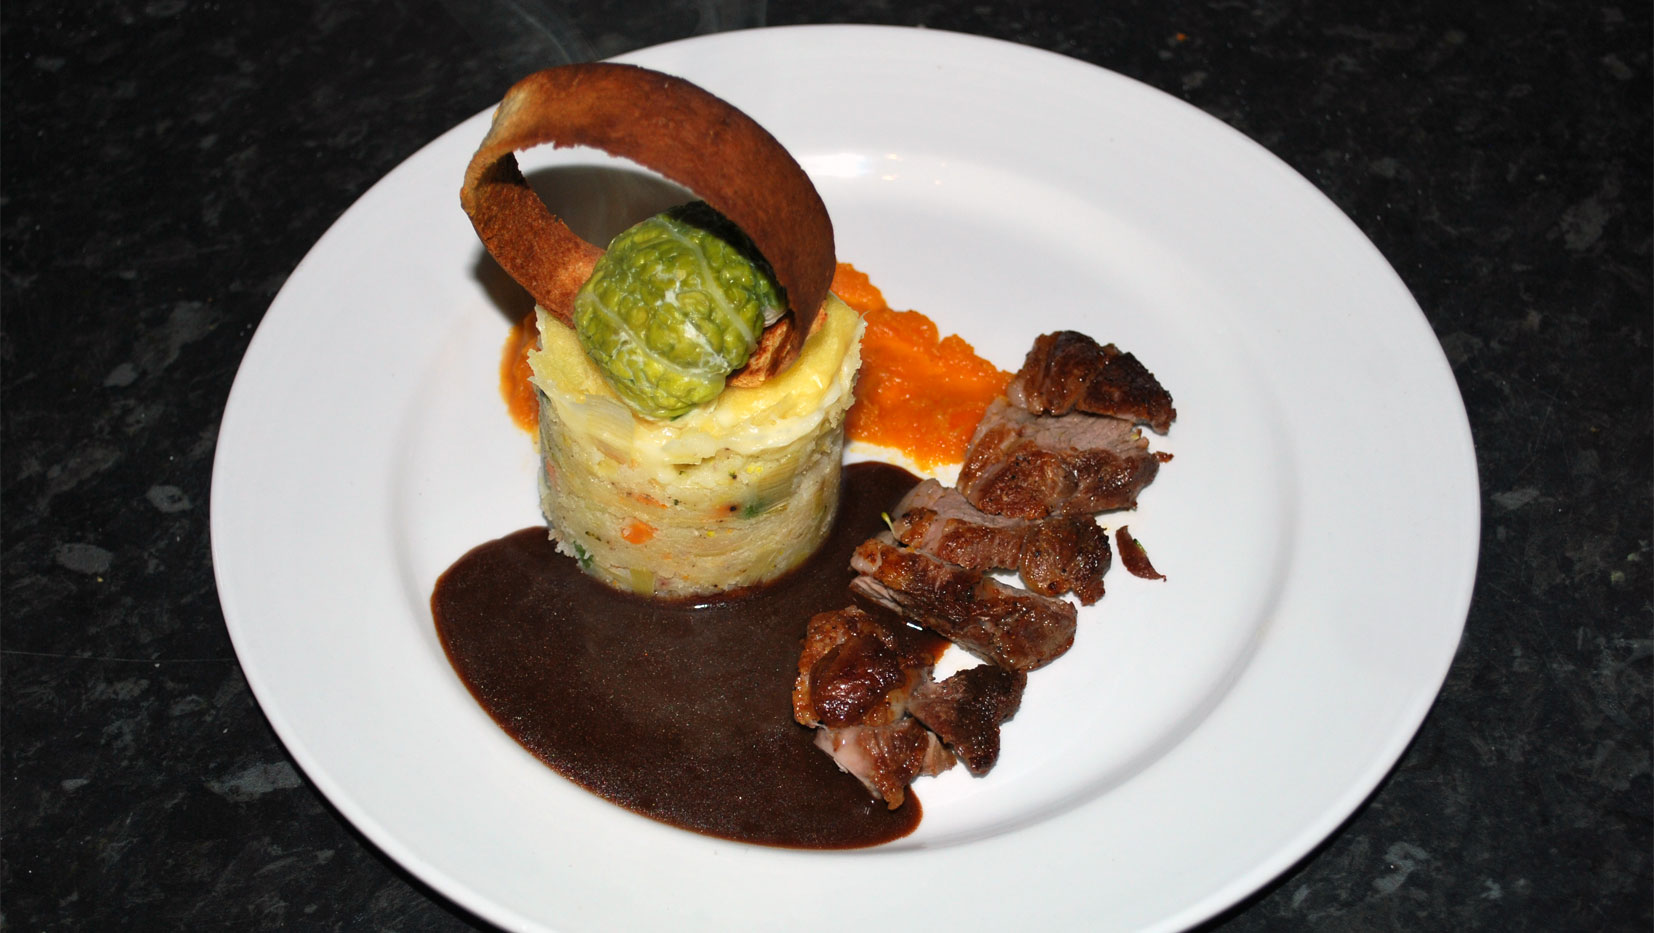 Shoulder of Lamb with Potato Tower